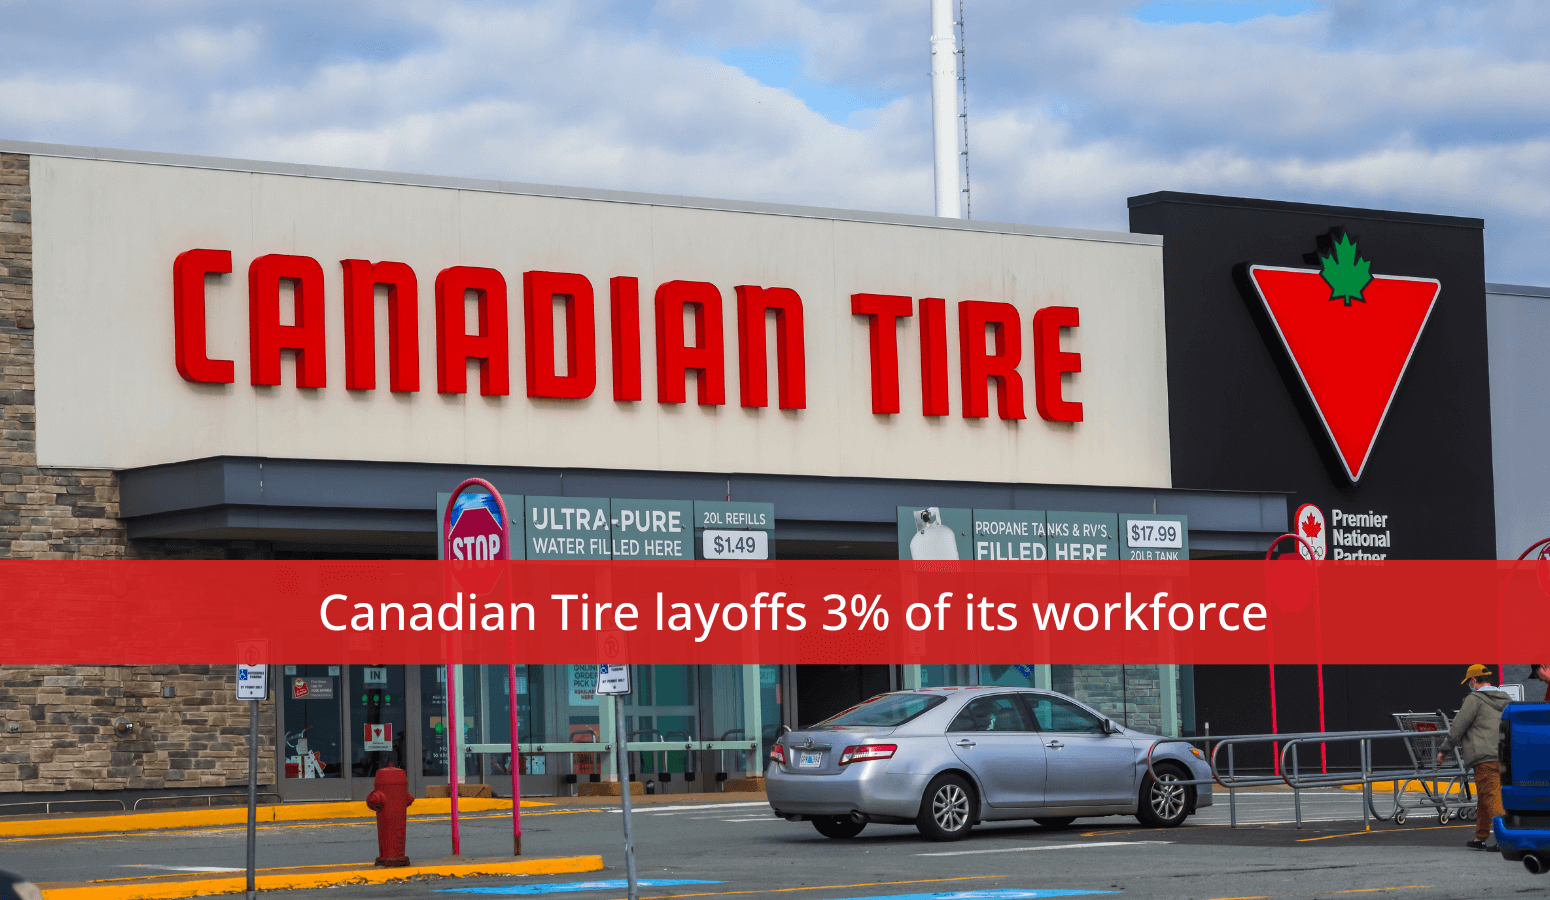 Featured image for “Canadian Tire layoffs 3% of its workforce”